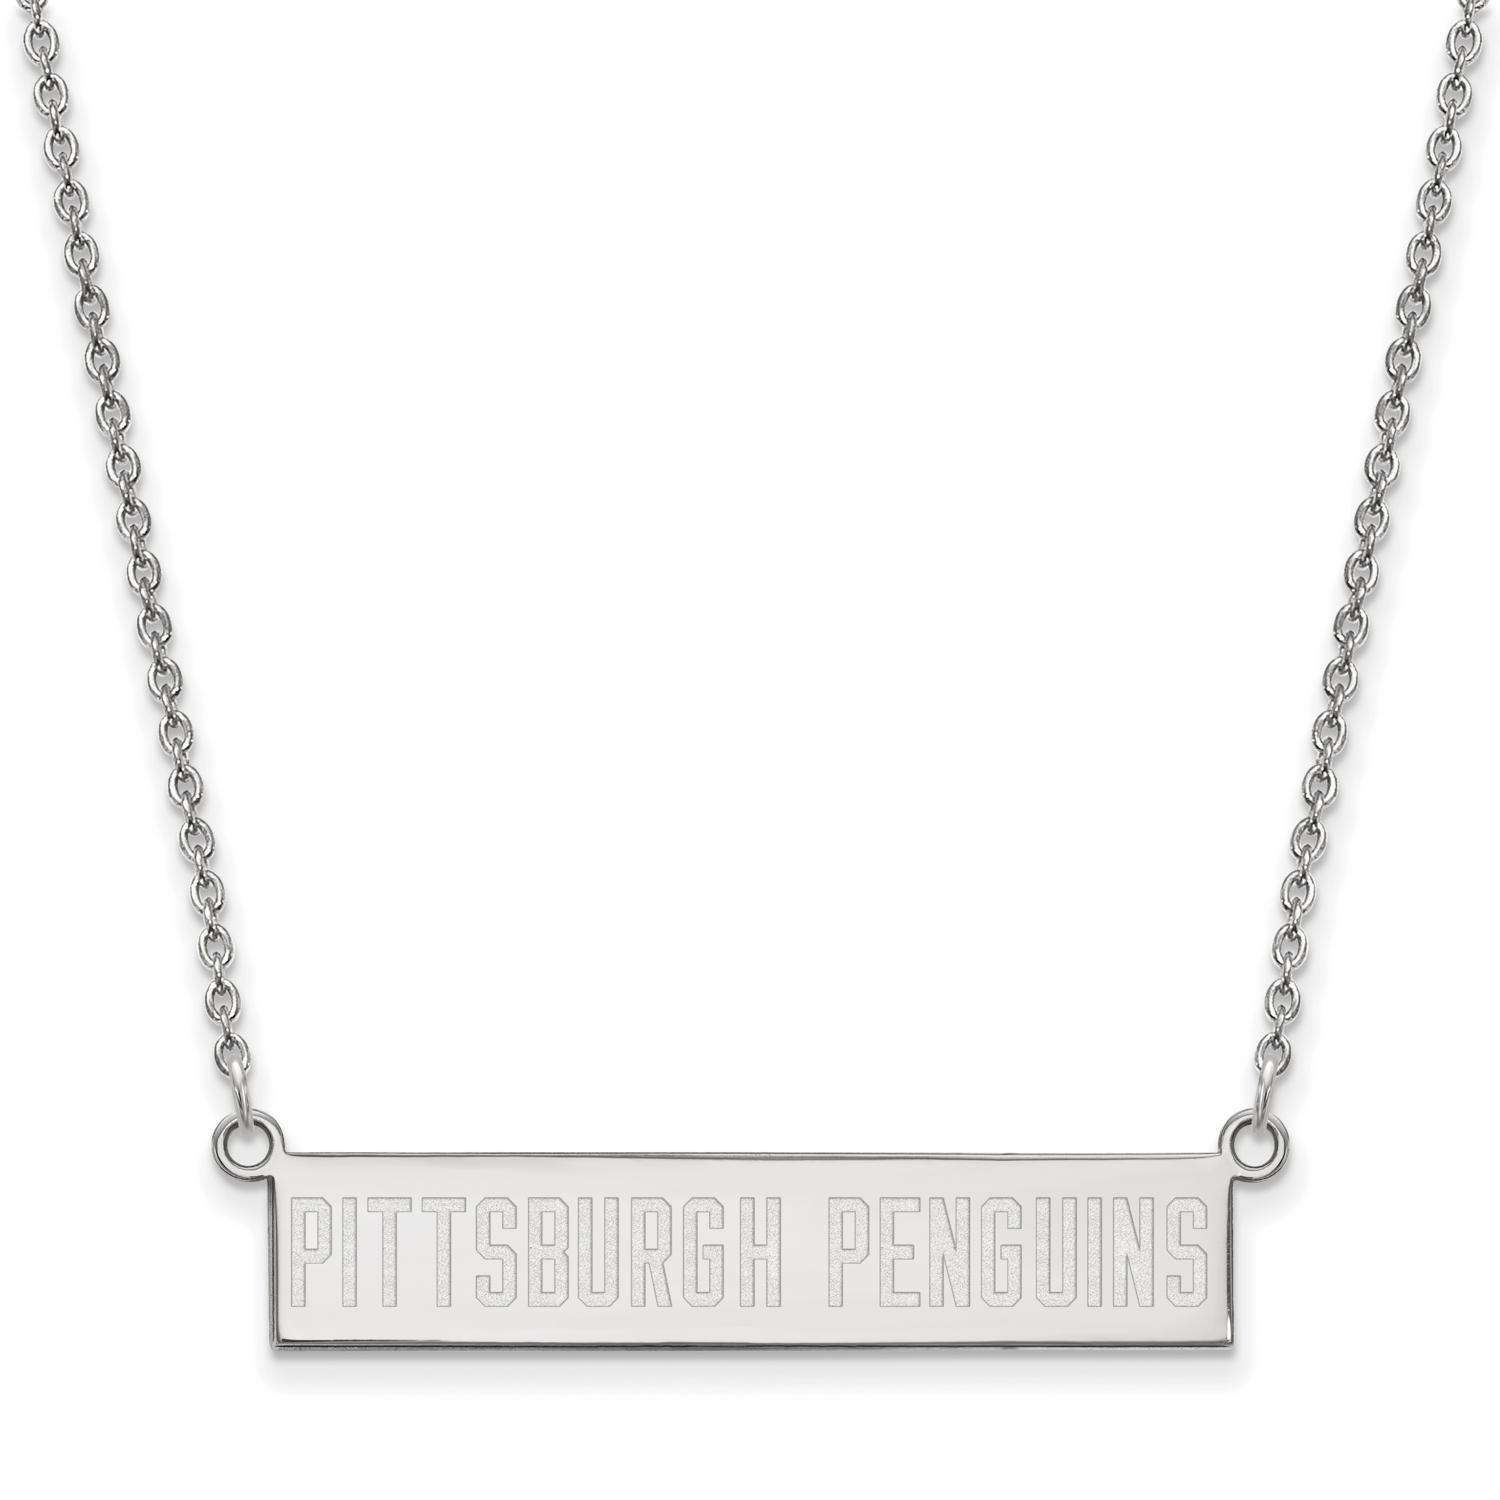 Pittsburh Penguins Small Bar Necklace Sterling Silver Rhodium-plated SS039PEN-18